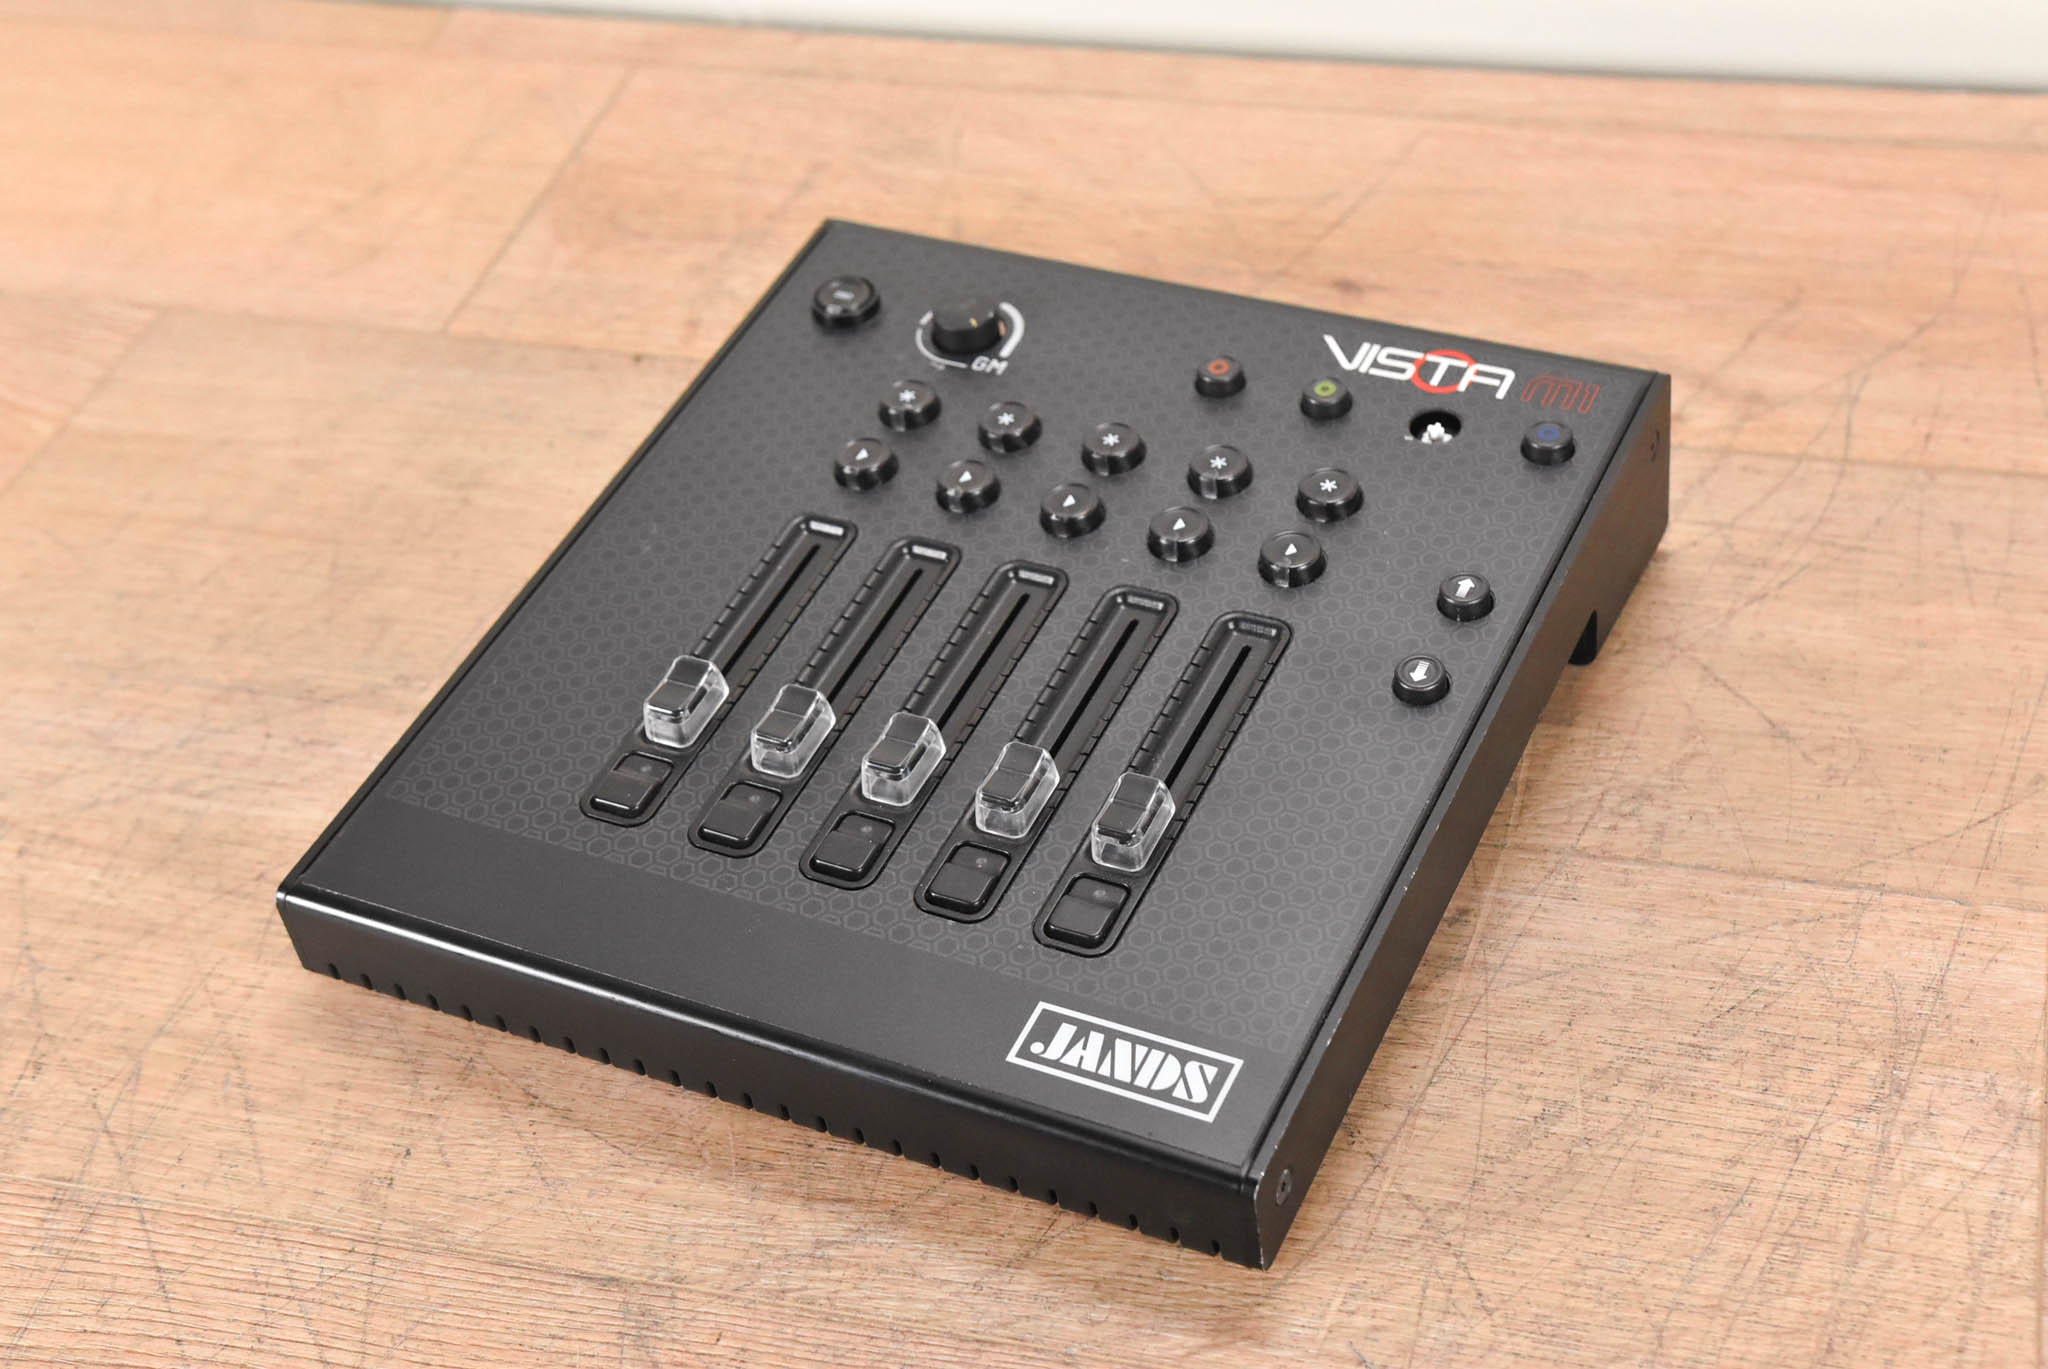 Jands Vista M1 Compact Playback-Only Control Surface